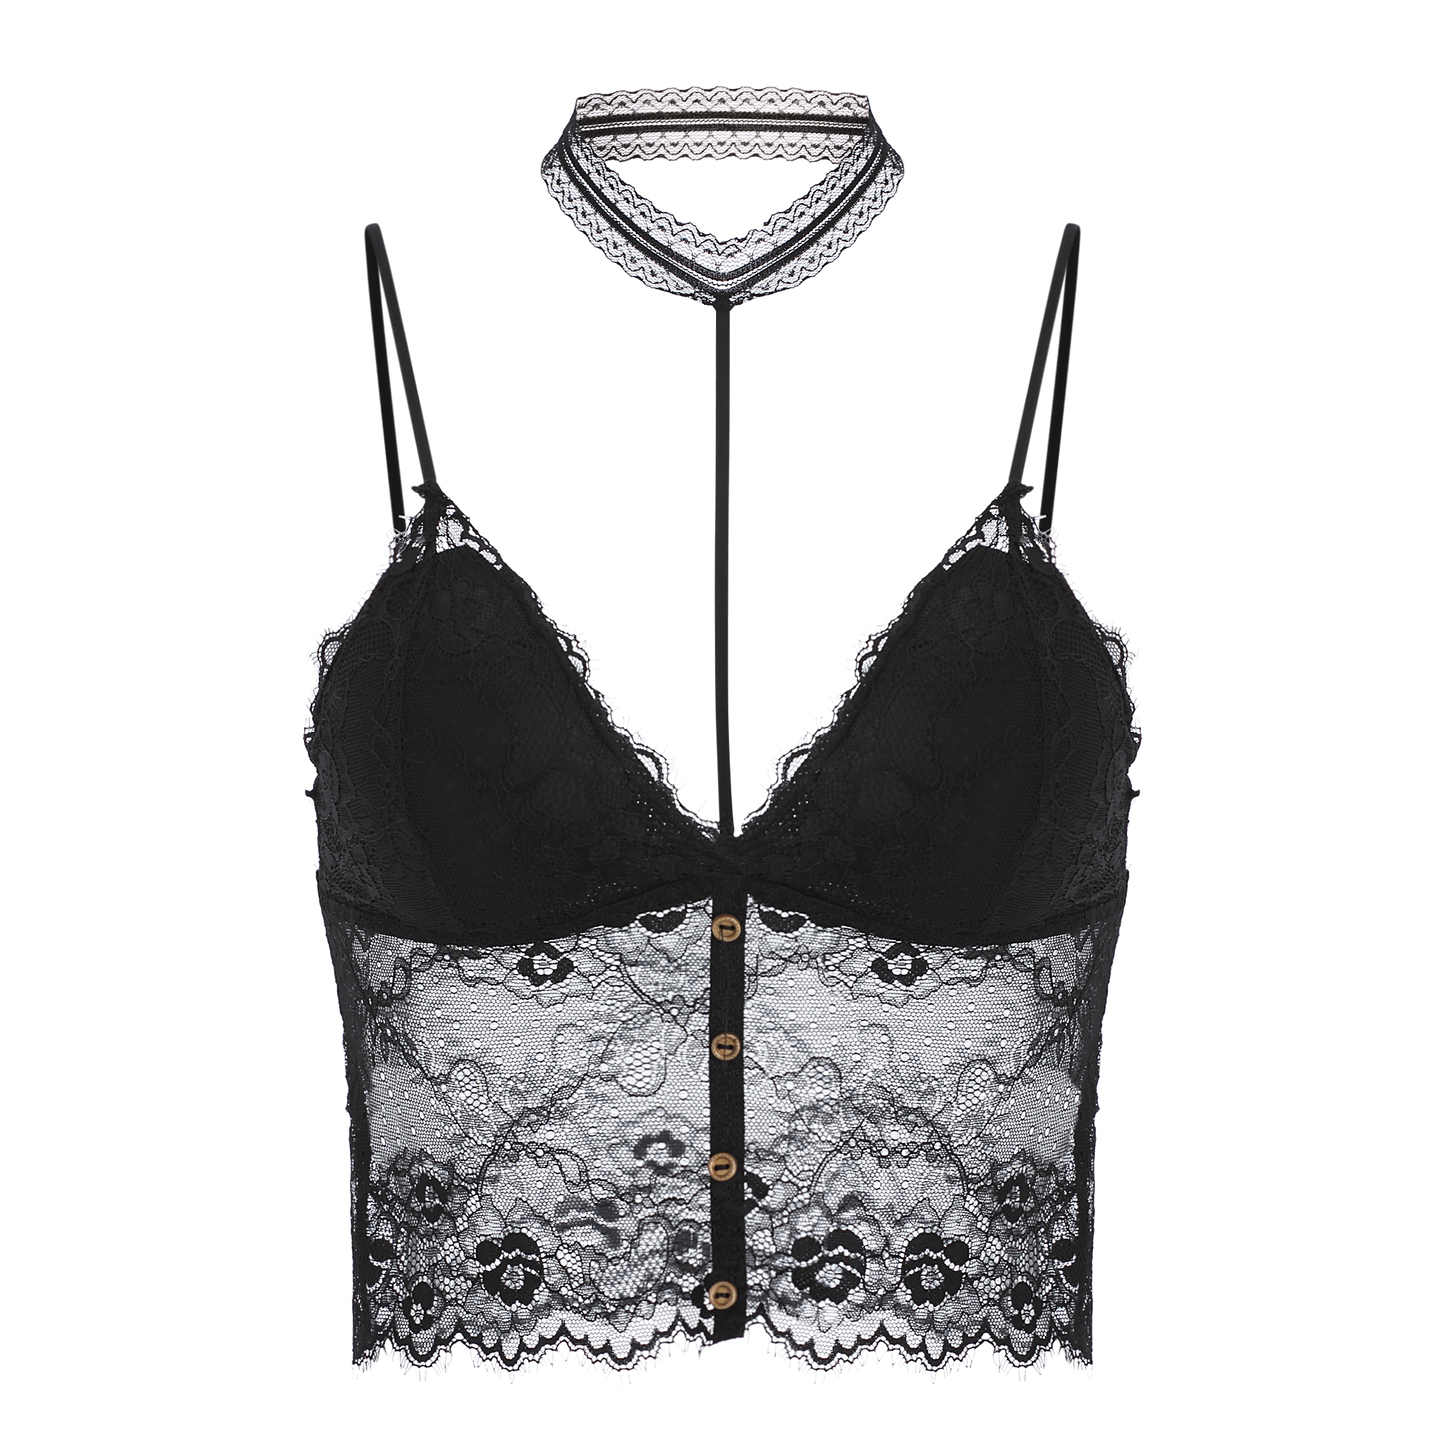 Elegant Black Lace Button-Up Bralette with Choker - French Style Camisole